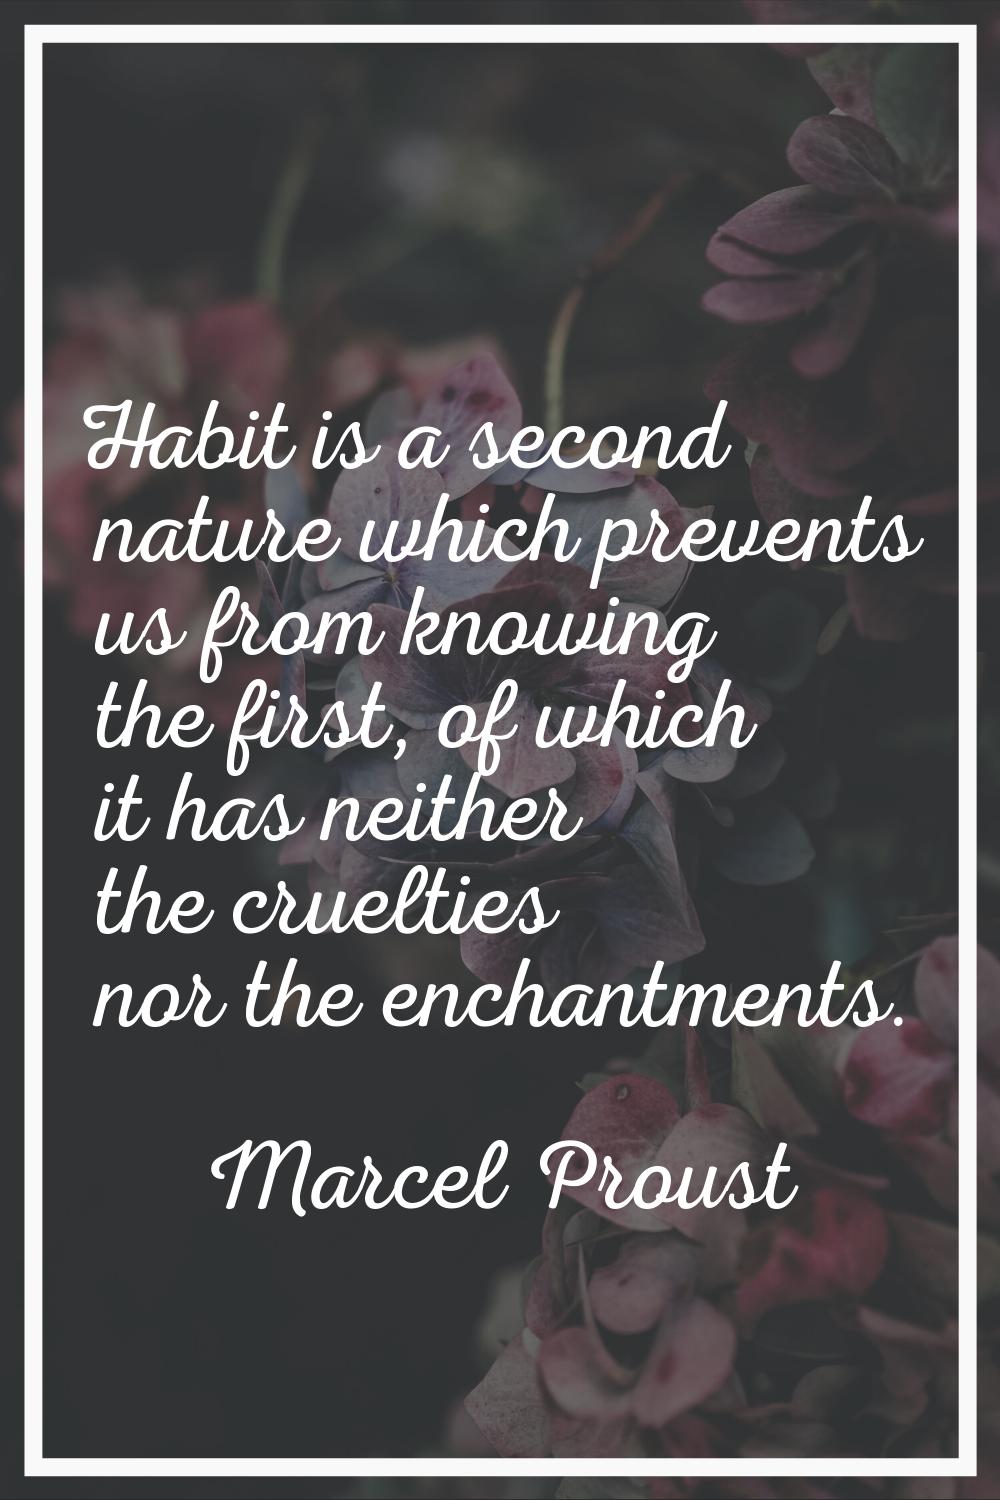 Habit is a second nature which prevents us from knowing the first, of which it has neither the crue